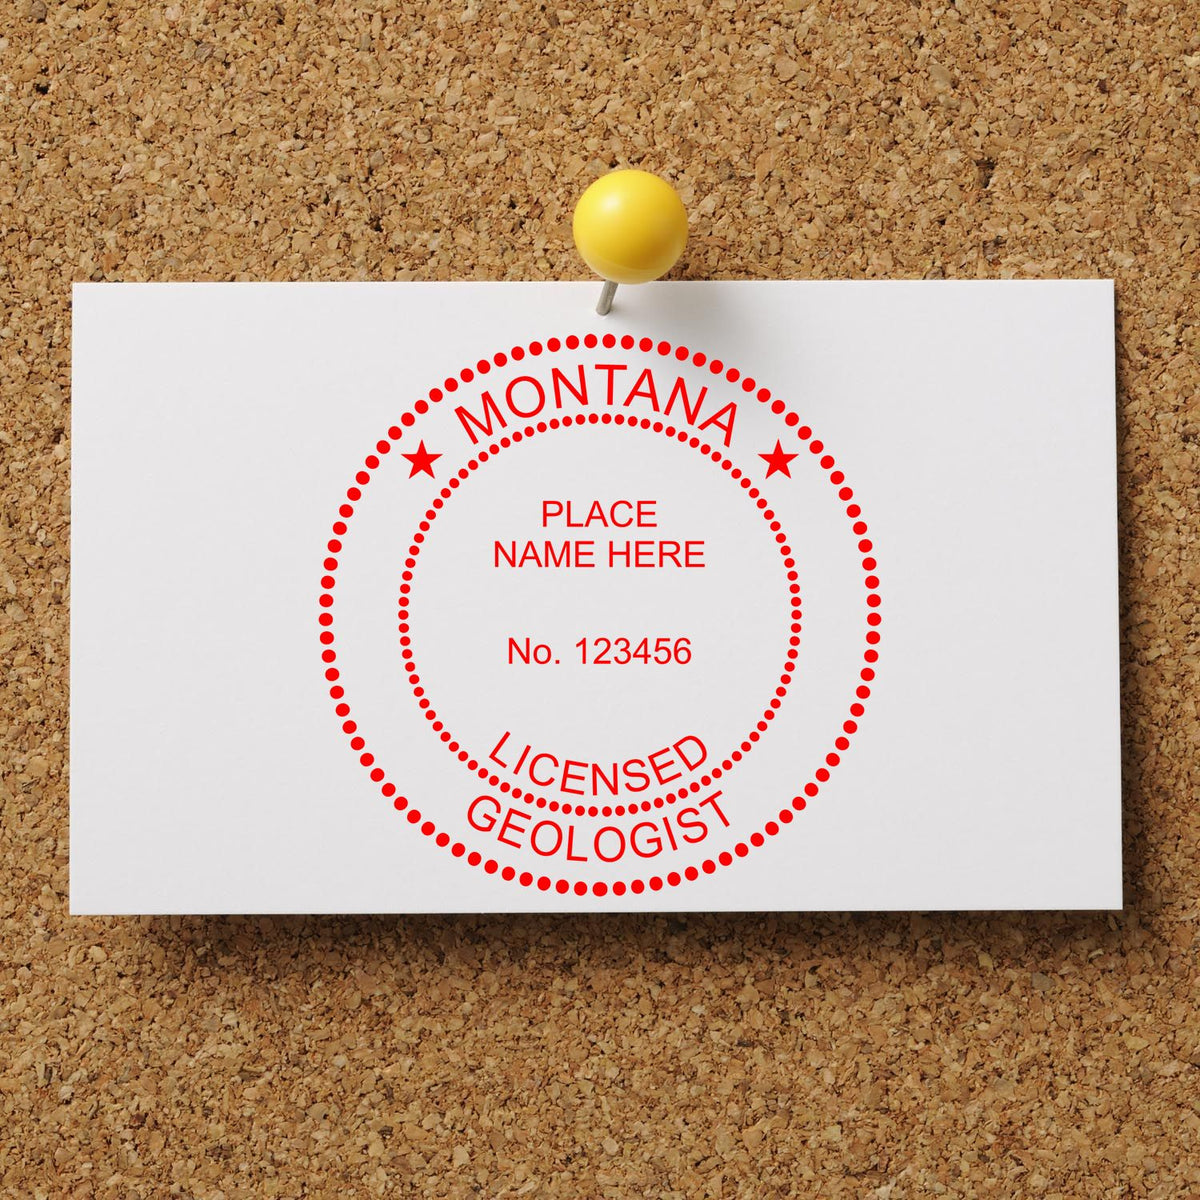 A lifestyle photo showing a stamped image of the Montana Professional Geologist Seal Stamp on a piece of paper